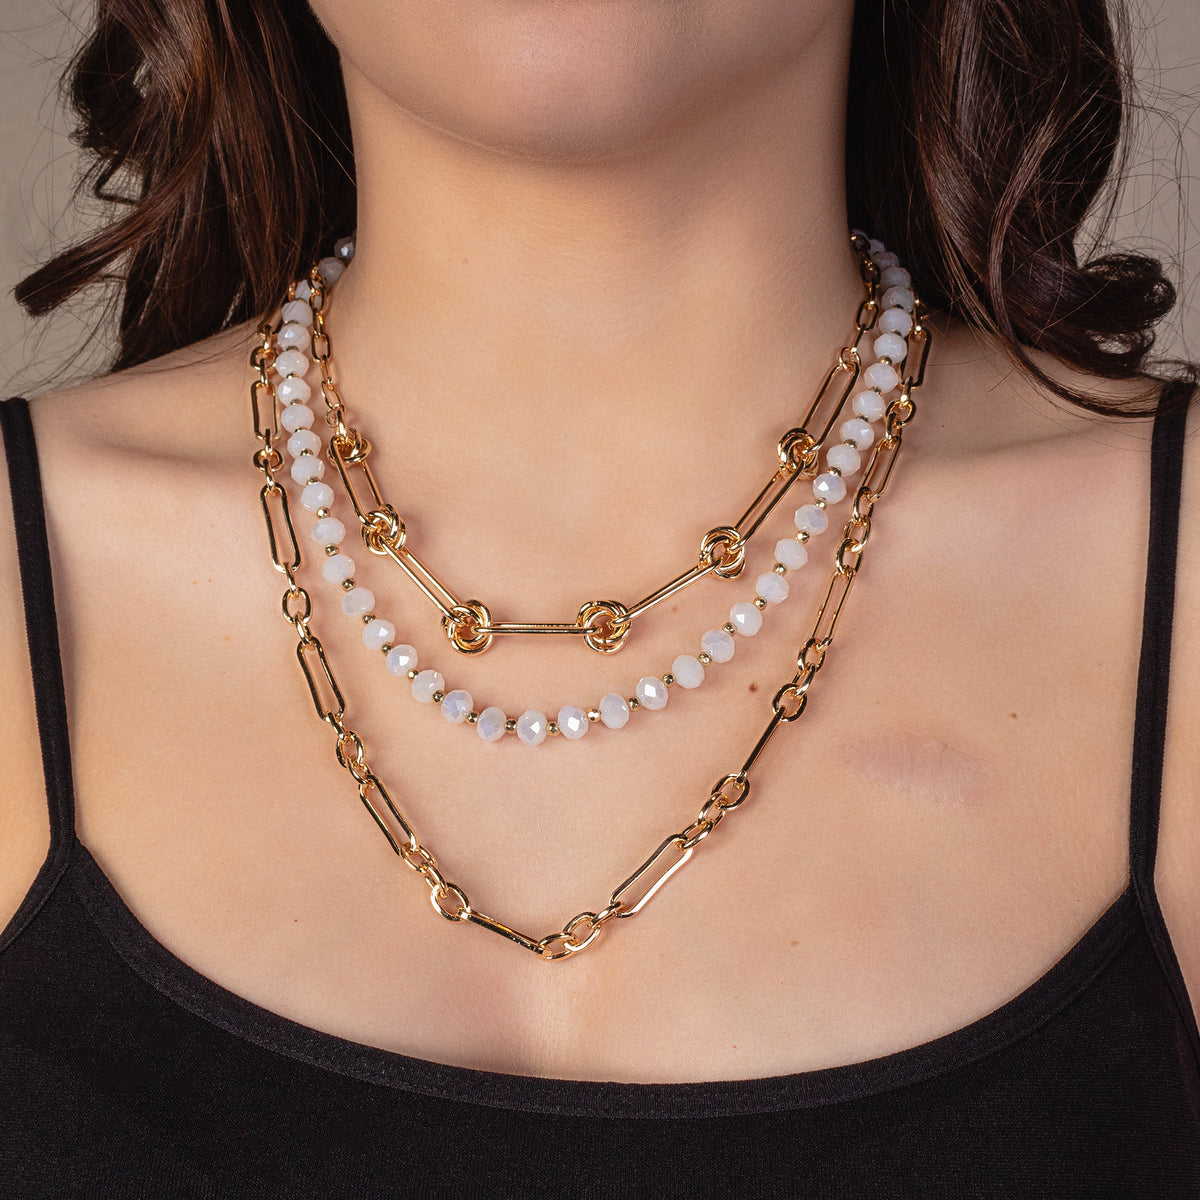 1137 - Layered Chain Necklace - White